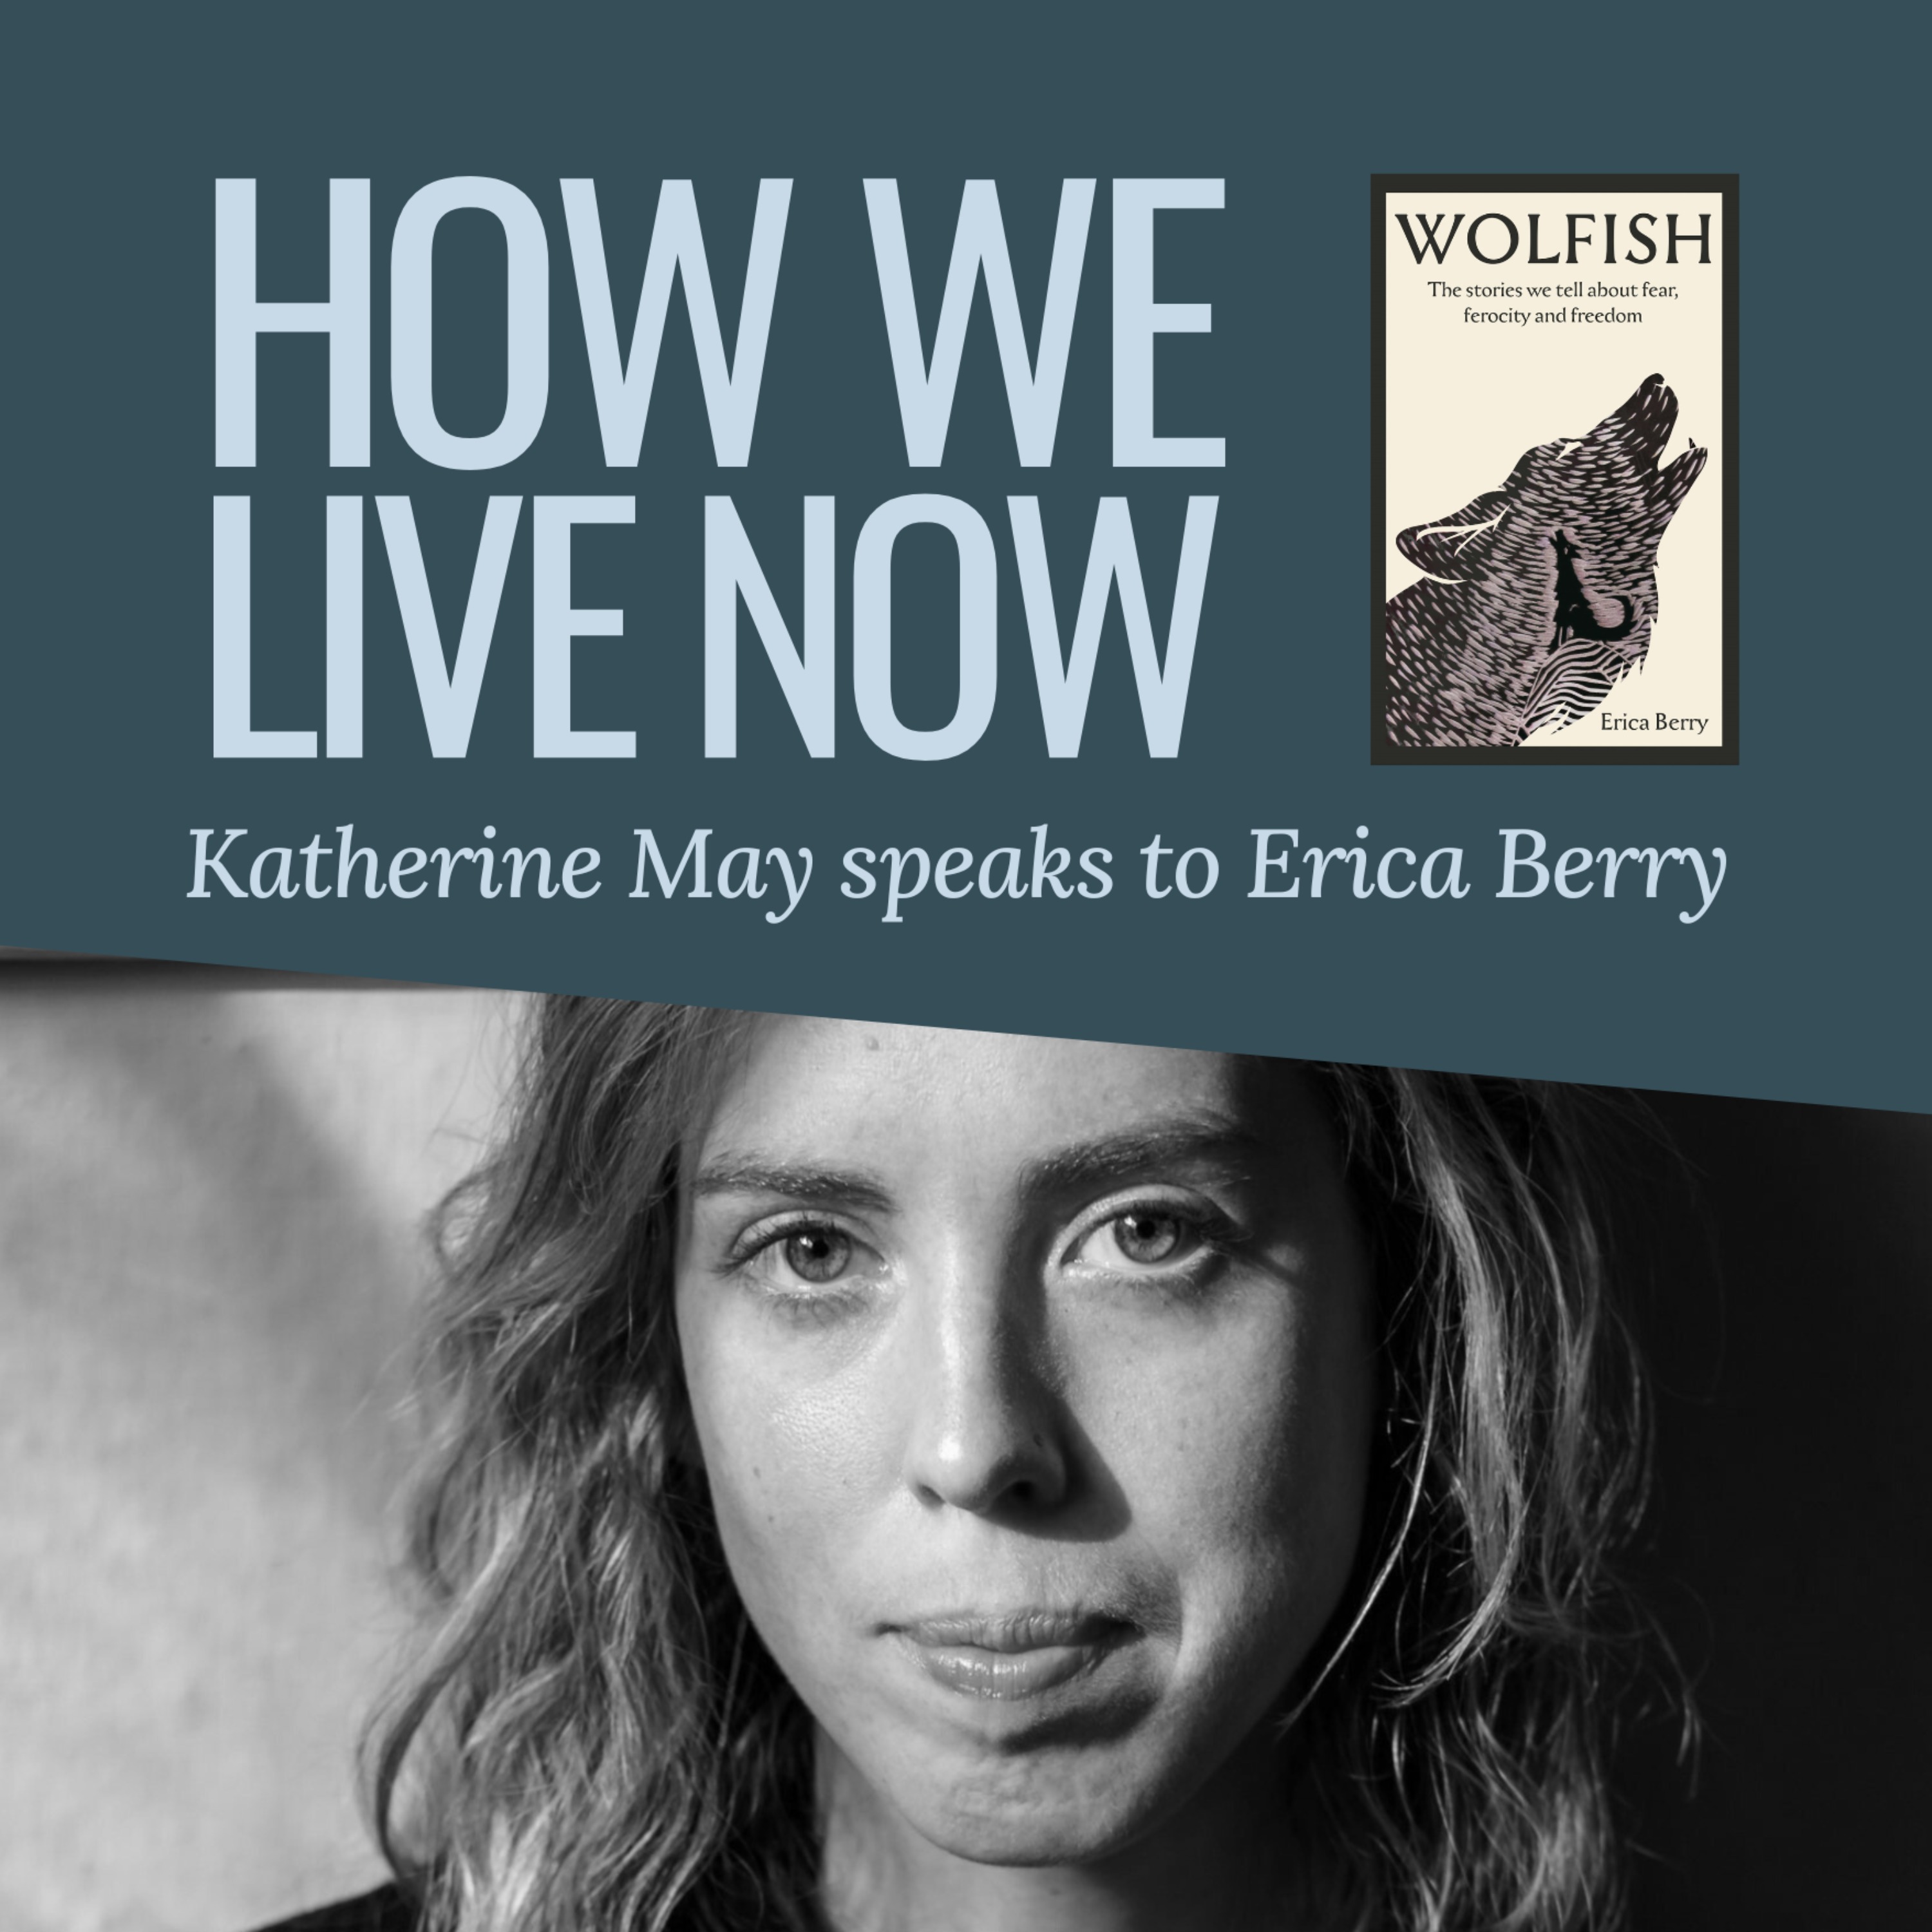 Erica Berry on the meaning of wolves